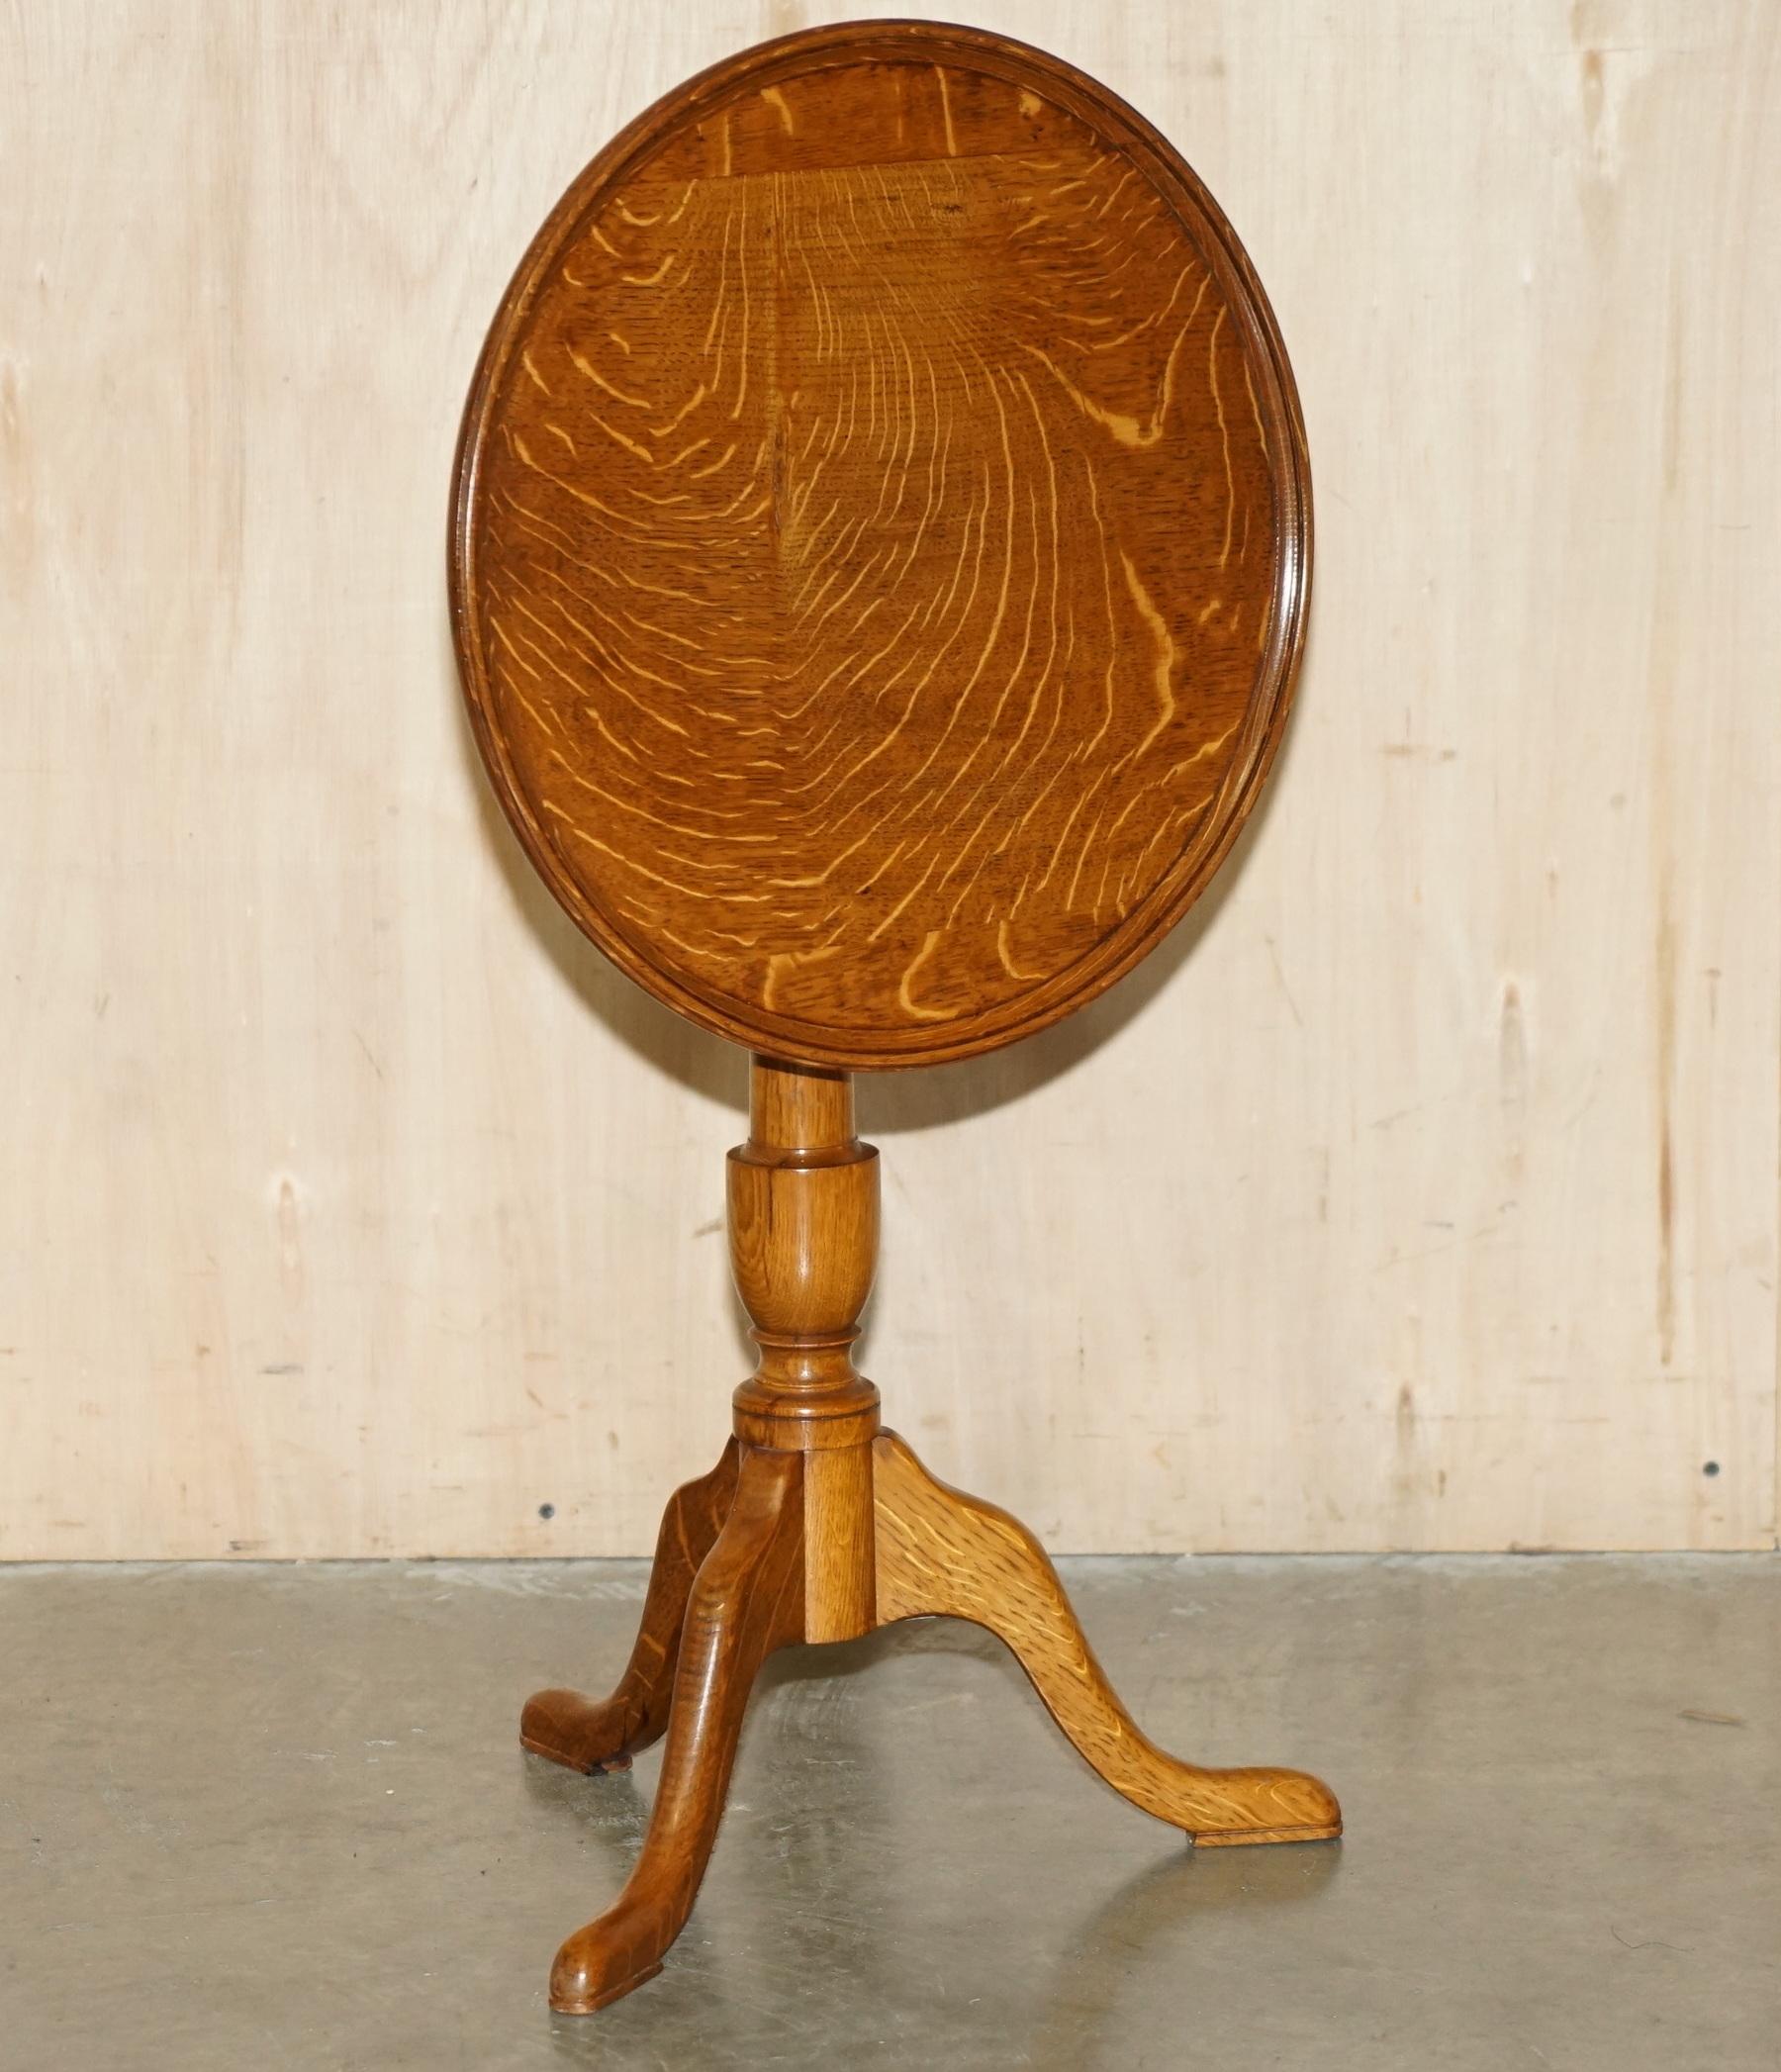 Royal House Antiques

Royal House Antiques is delighted to offer for sale this very fine antique circa 1840-1860 fully restored tilt top side table in Tiger Oak which has been traditionally French polished 

Please note the delivery fee listed is